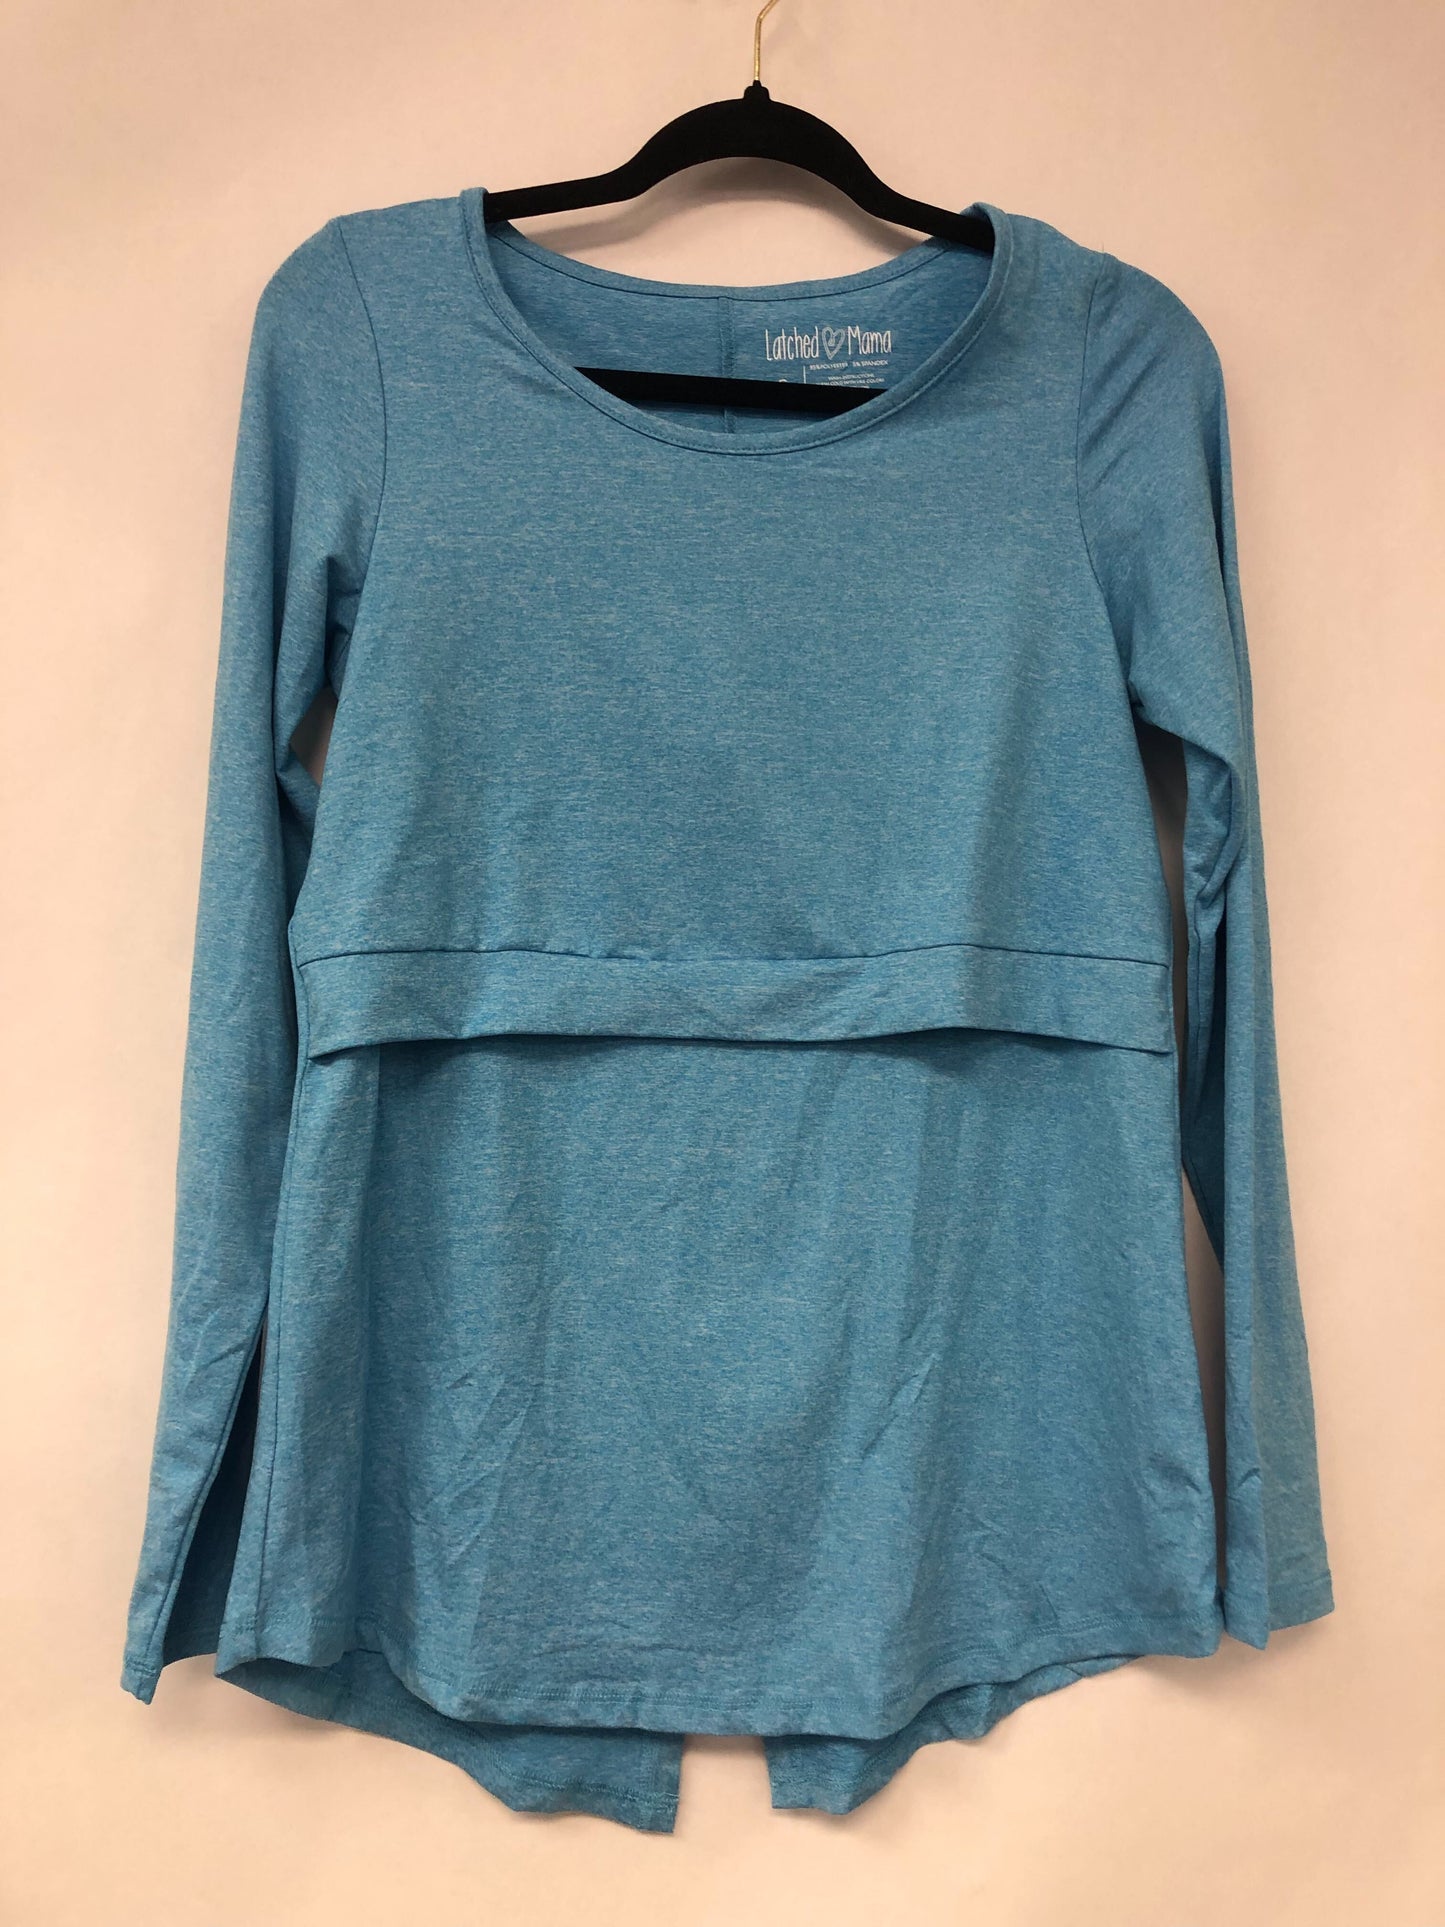 Outlet 6135 - Latched Mama Long Sleeve Performance Nursing Tee - Cyan - Small